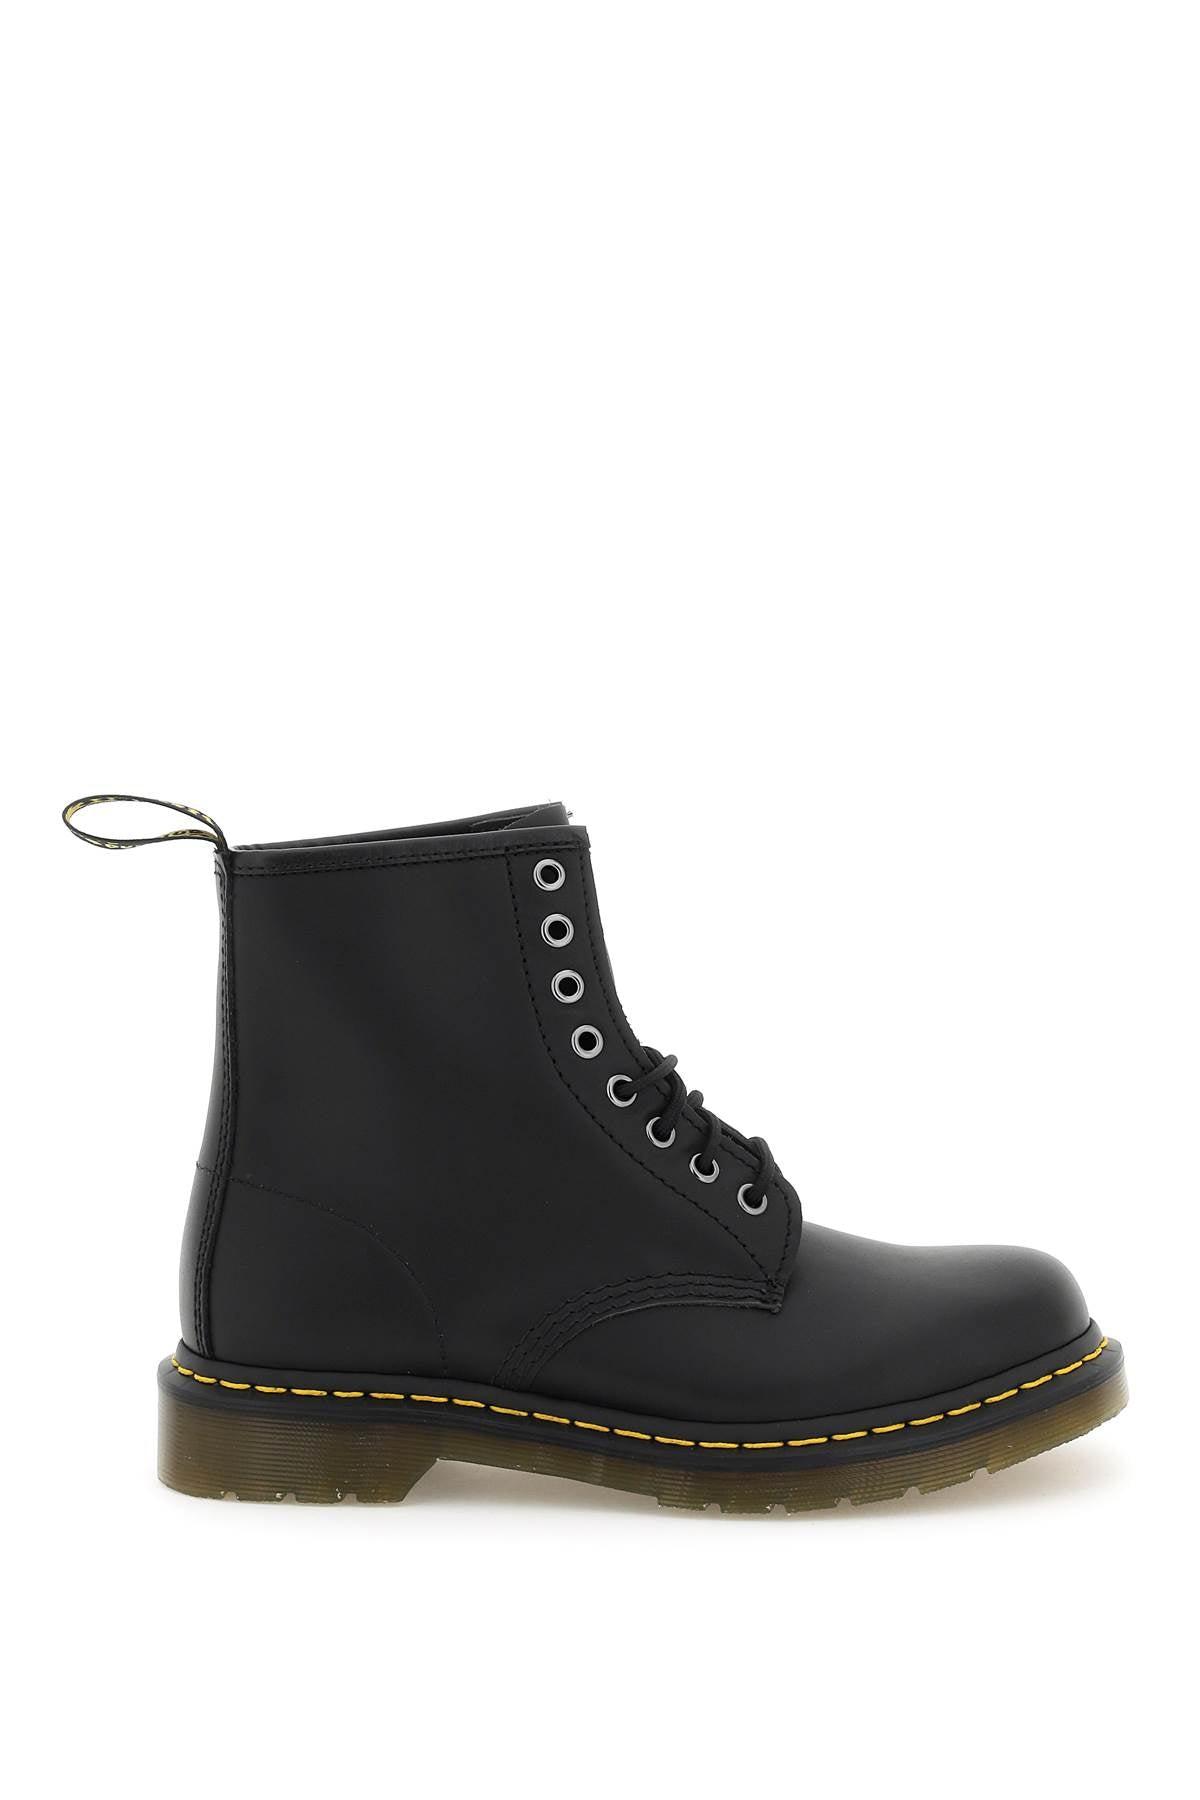 Dr. Martens Dr.martens 1460 Nappa Lace-up Combat Boots in Black | Lyst